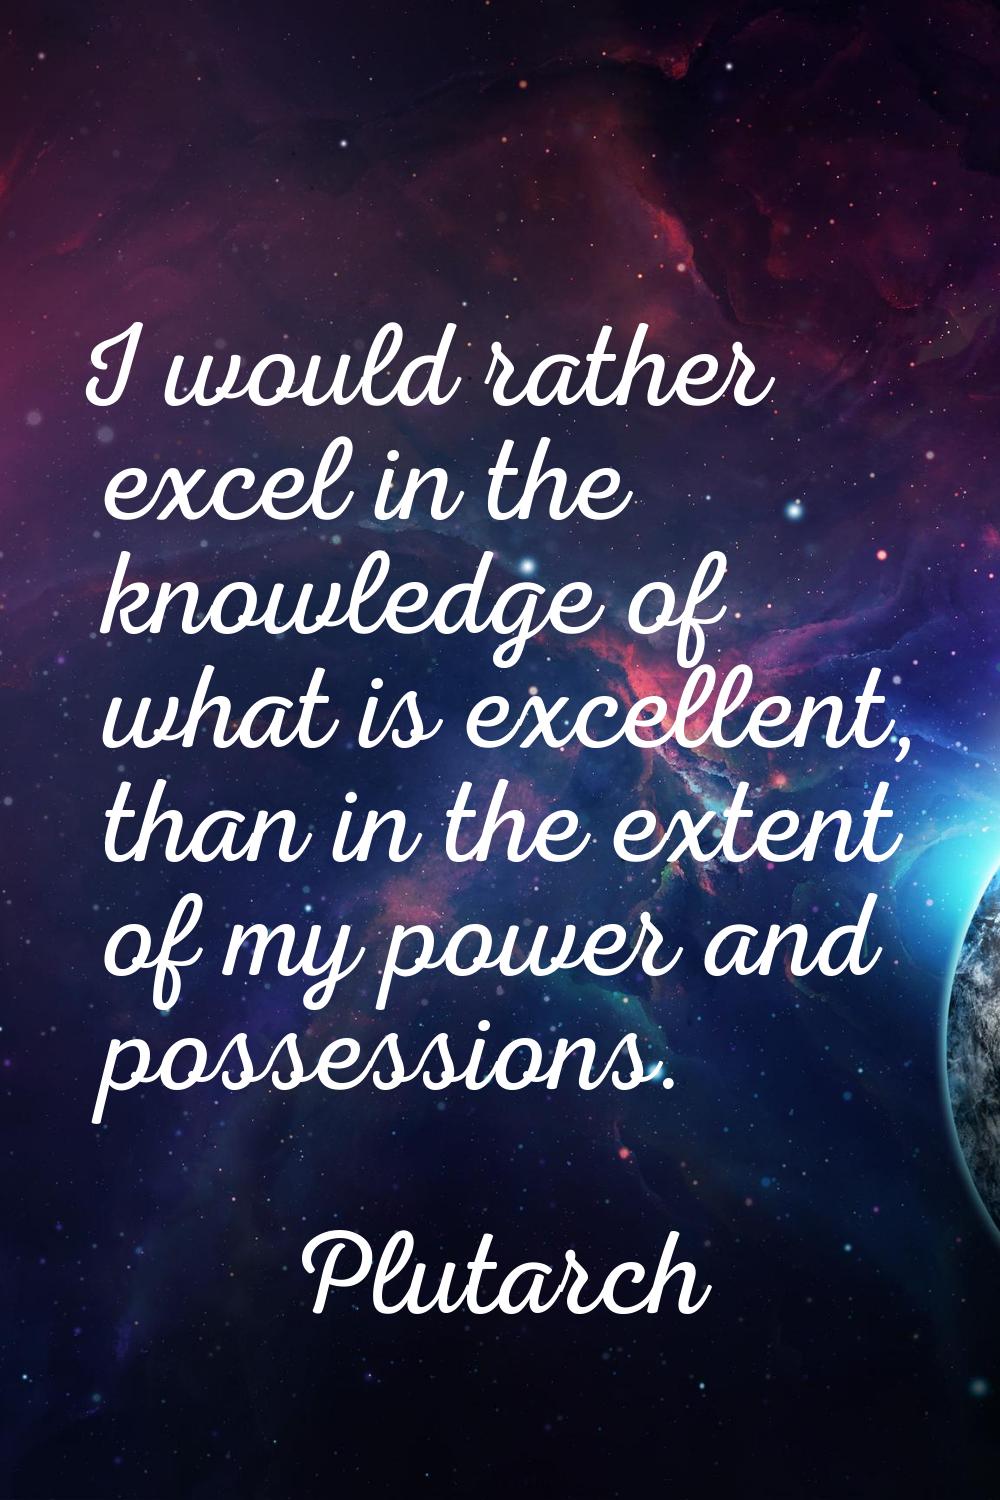 I would rather excel in the knowledge of what is excellent, than in the extent of my power and poss